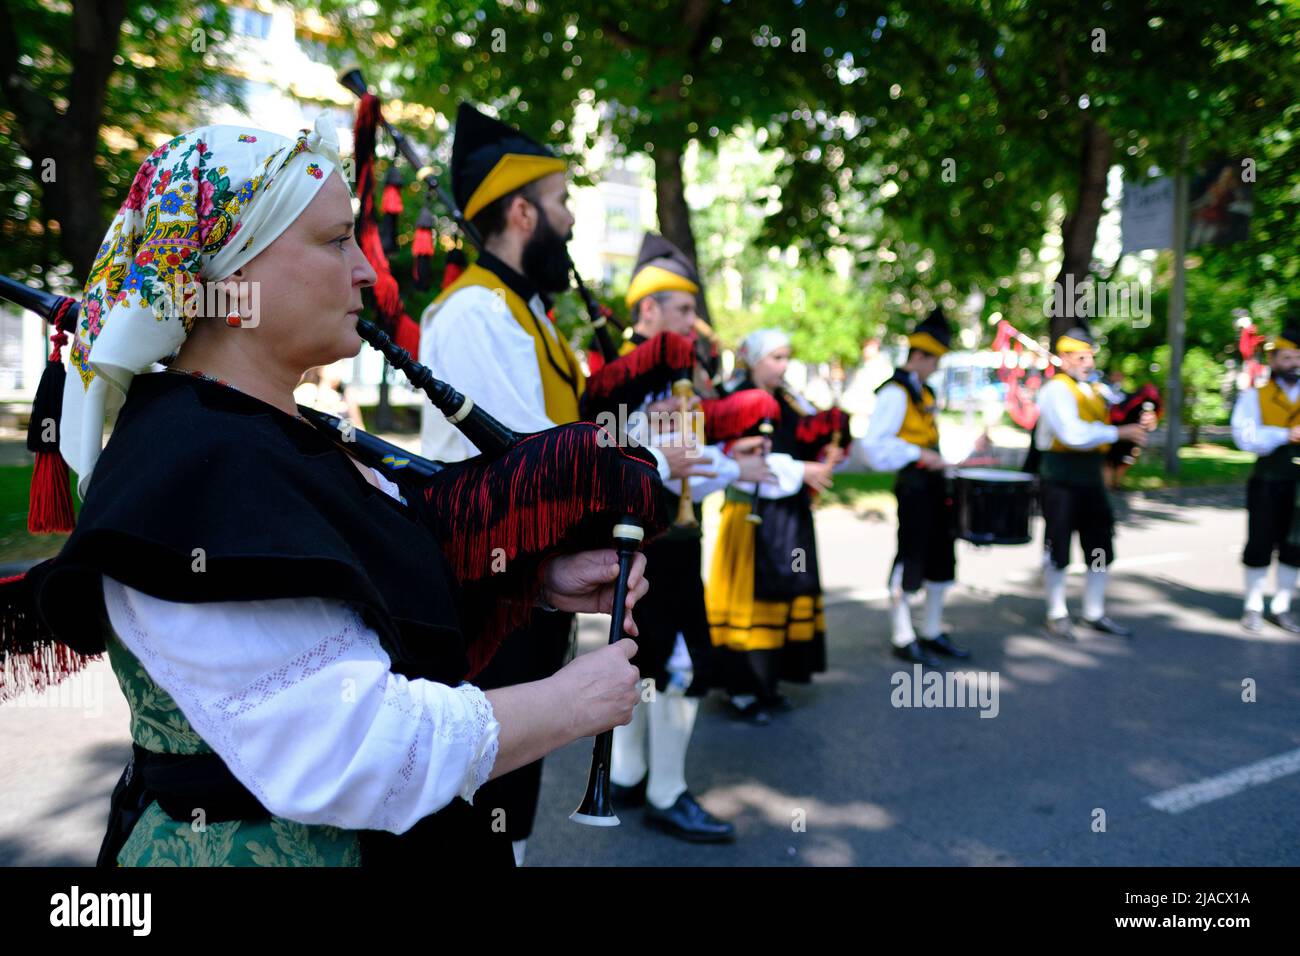 Madrid, Spain. 29th May, 2022. A woman dressed in traditional costume plays a bagpipe during the Dulzainas de la Villa festival at the Paseo del Prado in Madrid. The festival was organised by the ARARE association (Cultural Association of Music and Dance) for the dissemination of cultural traditions of Spain. Credit: SOPA Images Limited/Alamy Live News Stock Photo